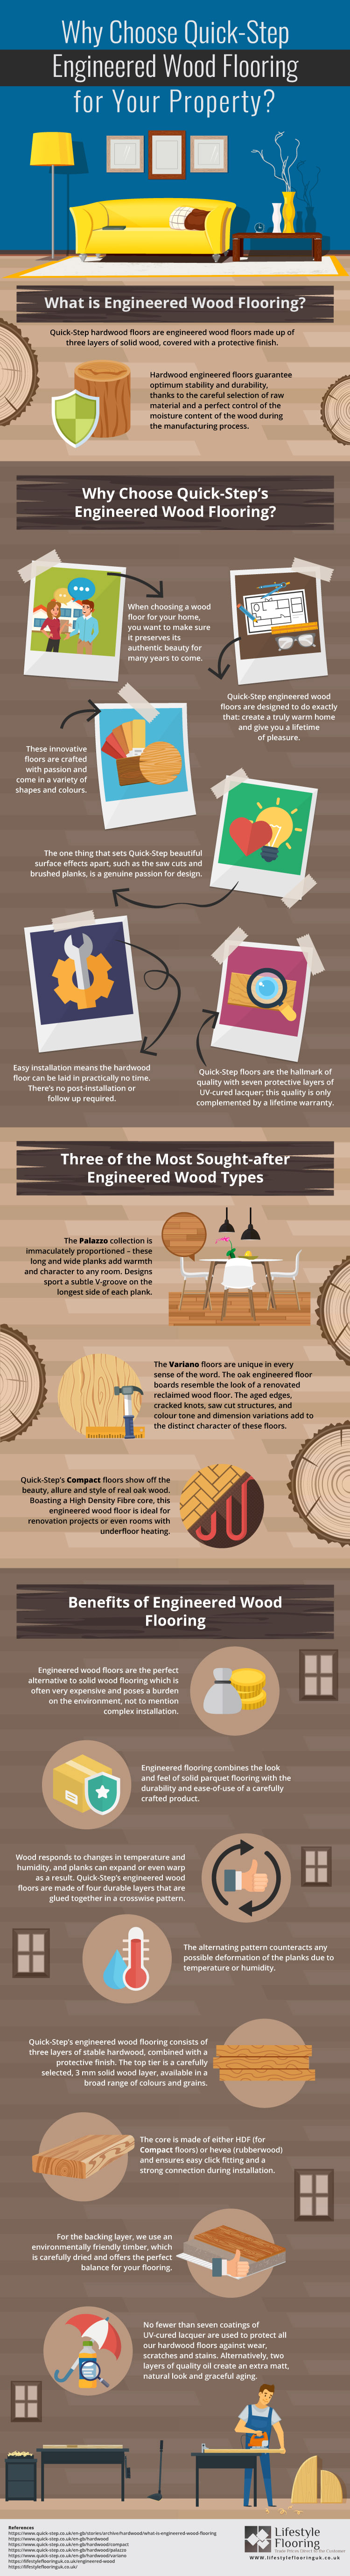 Why Choose Engineered Wood Flooring for Your Property